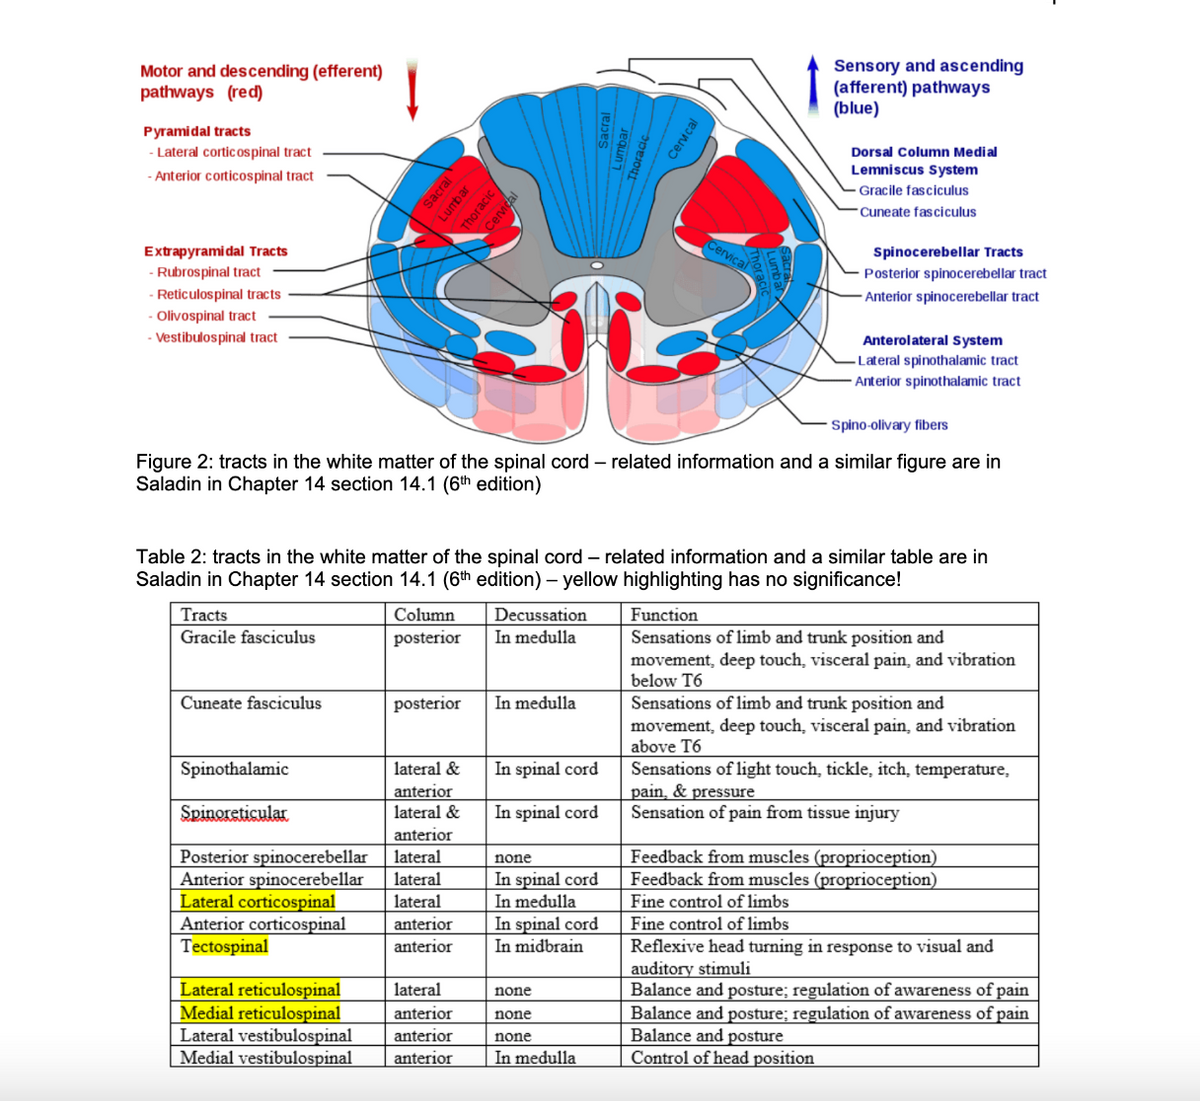 Motor and descending (efferent)
pathways (red)
Sensory and ascending
(afferent) pathways
(blue)
Pyramidal tracts
- Lateral cortic ospinal tract
Dorsal Column Medial
Lemniscus System
- Anterior corticospinal tract
Gracile fasciculus
Cuneate fasciculus
Extrapyrami dal Tracts
- Rubrospinal tract
- Reticulospinal tracts
Spinocerebellar Tracts
Posterior spinocerebellar tract
Anterior spinocerebellar tract
Olivospinal tract
- Vestibulospinal tract
Anterolateral System
Lateral spinothalamic tract
Anterior spinothalamic tract
Spino-olivary fibers
Figure 2: tracts in the white matter of the spinal cord – related information and a similar figure are in
Saladin in Chapter 14 section 14.1 (6th edition)
Table 2: tracts in the white matter of the spinal cord – related information and a similar table are in
Saladin in Chapter 14 section 14.1 (6th edition) – yellow highlighting has no significance!
Function
Sensations of limb and trunk position and
movement, deep touch, visceral pain, and vibration
below T6
Tracts
Column
Decussation
Gracile fasciculus
posterior
In medulla
Cuneate fasciculus
posterior
In medulla
Sensations of limb and trunk position and
movement, deep touch, visceral pain, and vibration
above T6
In spinal cord
Sensations of light touch, tickle, itch, temperature,
pain, & pressure
Sensation of pain from tissue injury
Spinothalamic
lateral &
anterior
Spinoreticular
lateral &
In spinal cord
anterior
Feedback from muscles (proprioception)
Feedback from muscles (proprioception)
Posterior spinocerebellar
Anterior spinocerebellar
Lateral corticospinal
Anterior corticospinal
Tectospinal
lateral
none
In spinal cord
In medulla
In spinal cord
In midbrain
lateral
lateral
Fine control of limbs
anterior
Fine control of limbs
Reflexive head turning in response to visual and
auditory stimuli
Balance and posture; regulation of awareness of pain
Balance and posture; regulation of awareness of pain
Balance and posture
Control of head position
anterior
Lateral reticulospinal
Medial reticulospinal
Lateral vestibulospinal
Medial vestibulospinal
lateral
none
anterior
none
anterior
none
anterior
In medulla
sacral
Lumbar
Thoracic
Cervical
Sacral
Lumbar
Thoracic
Cervical
